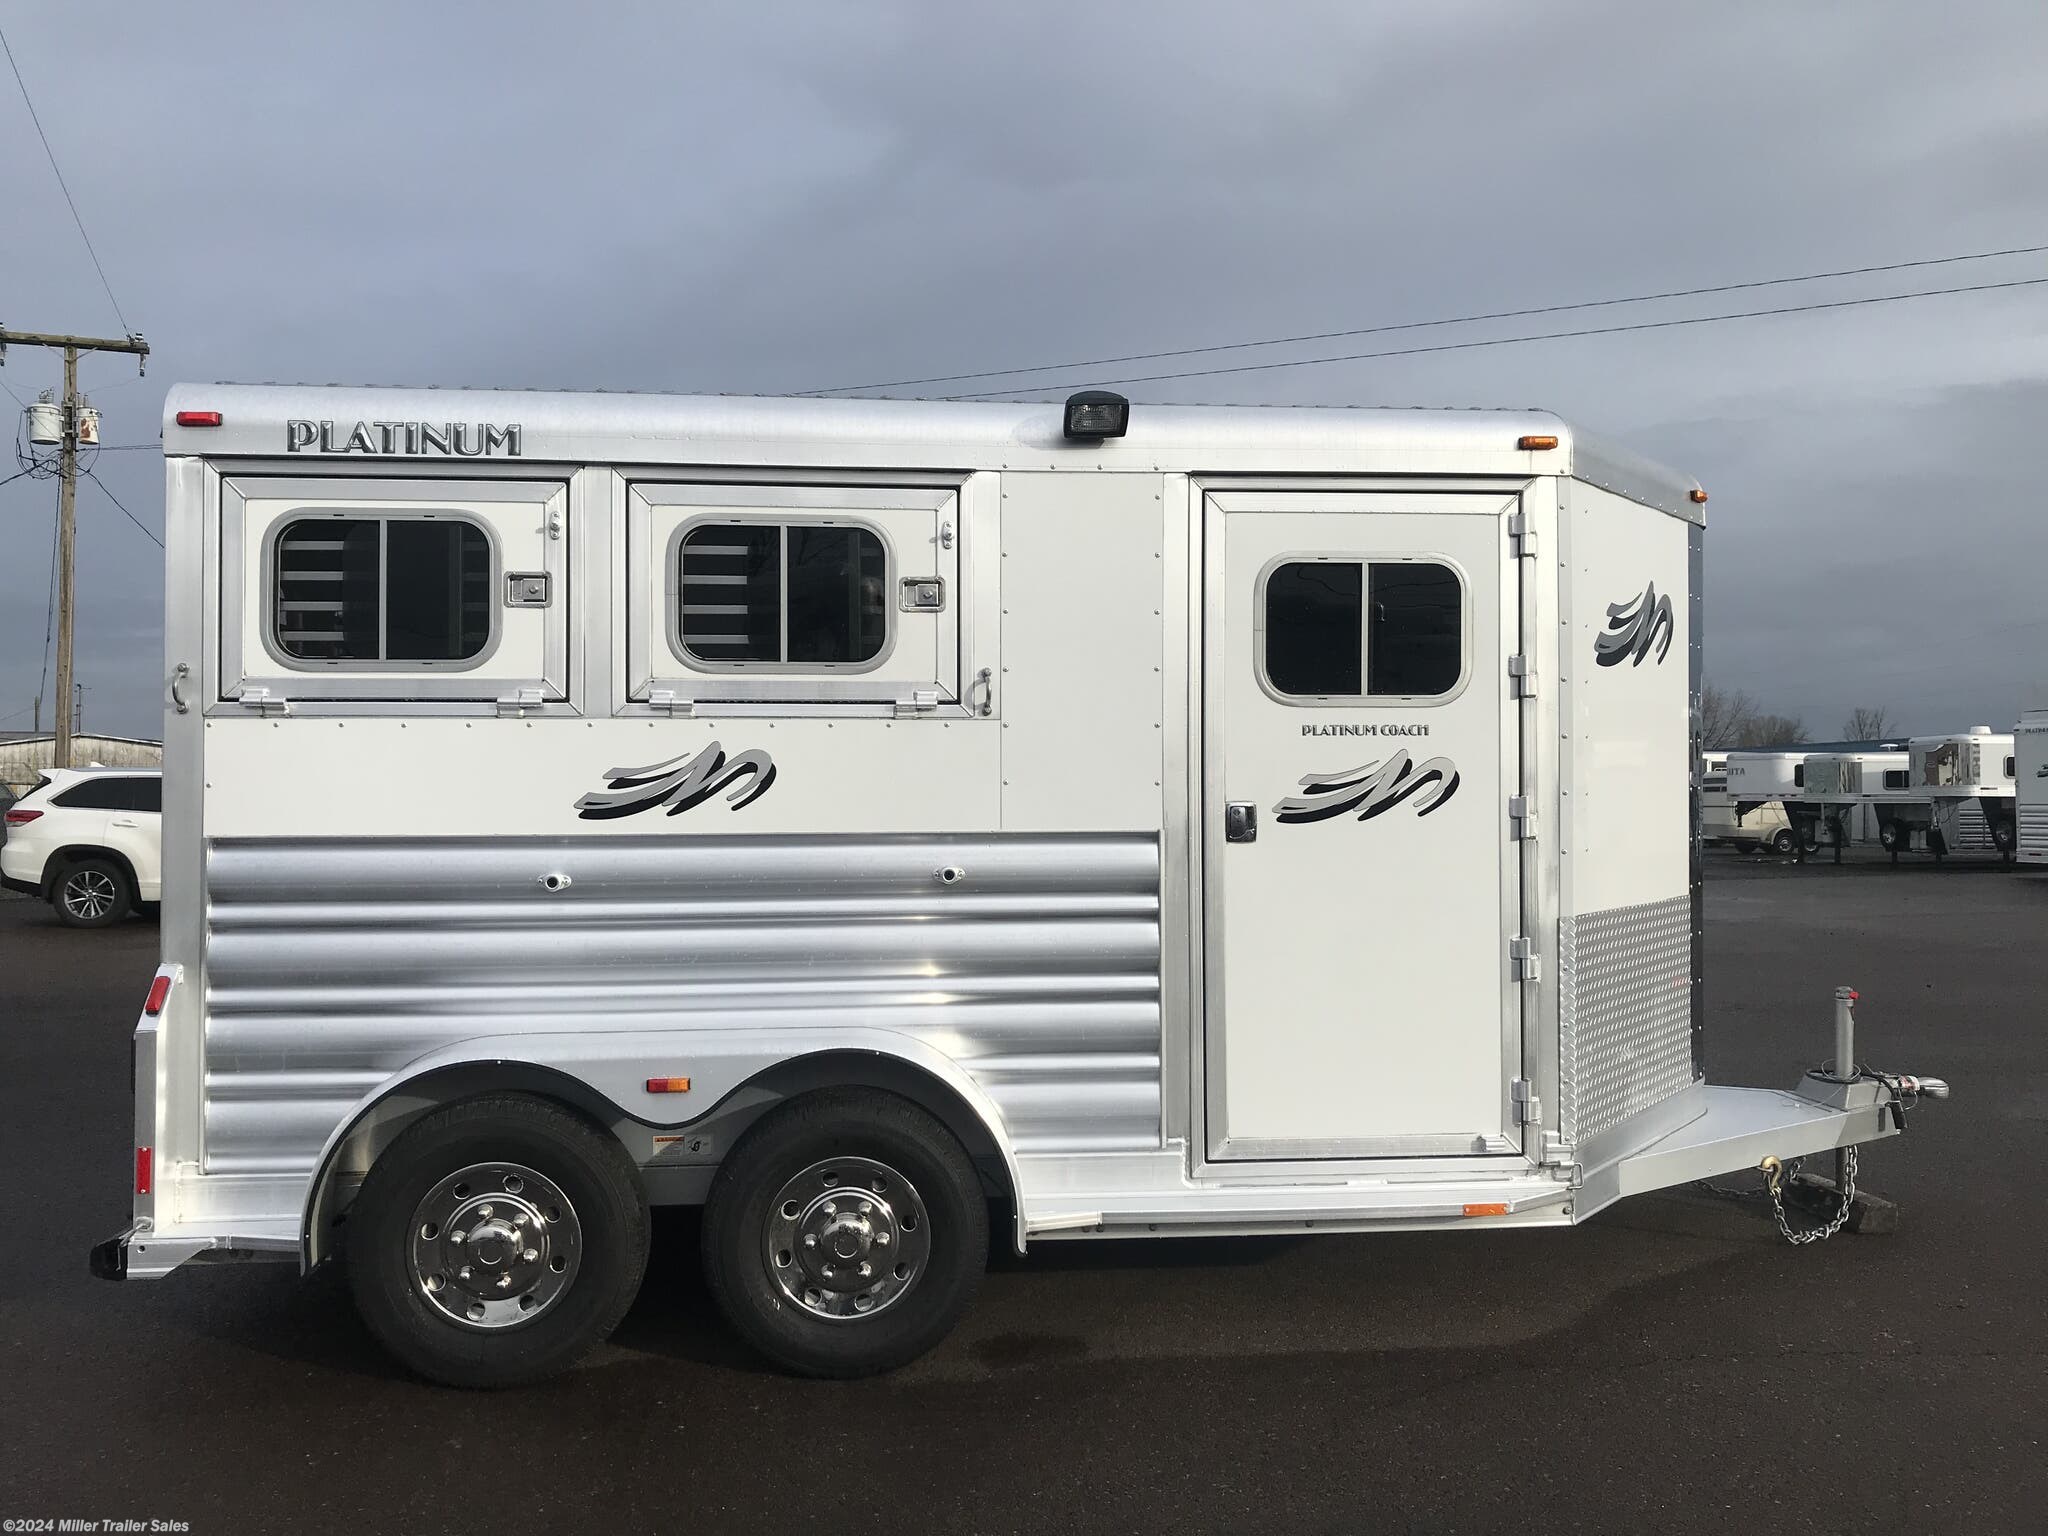 2 horse trailers